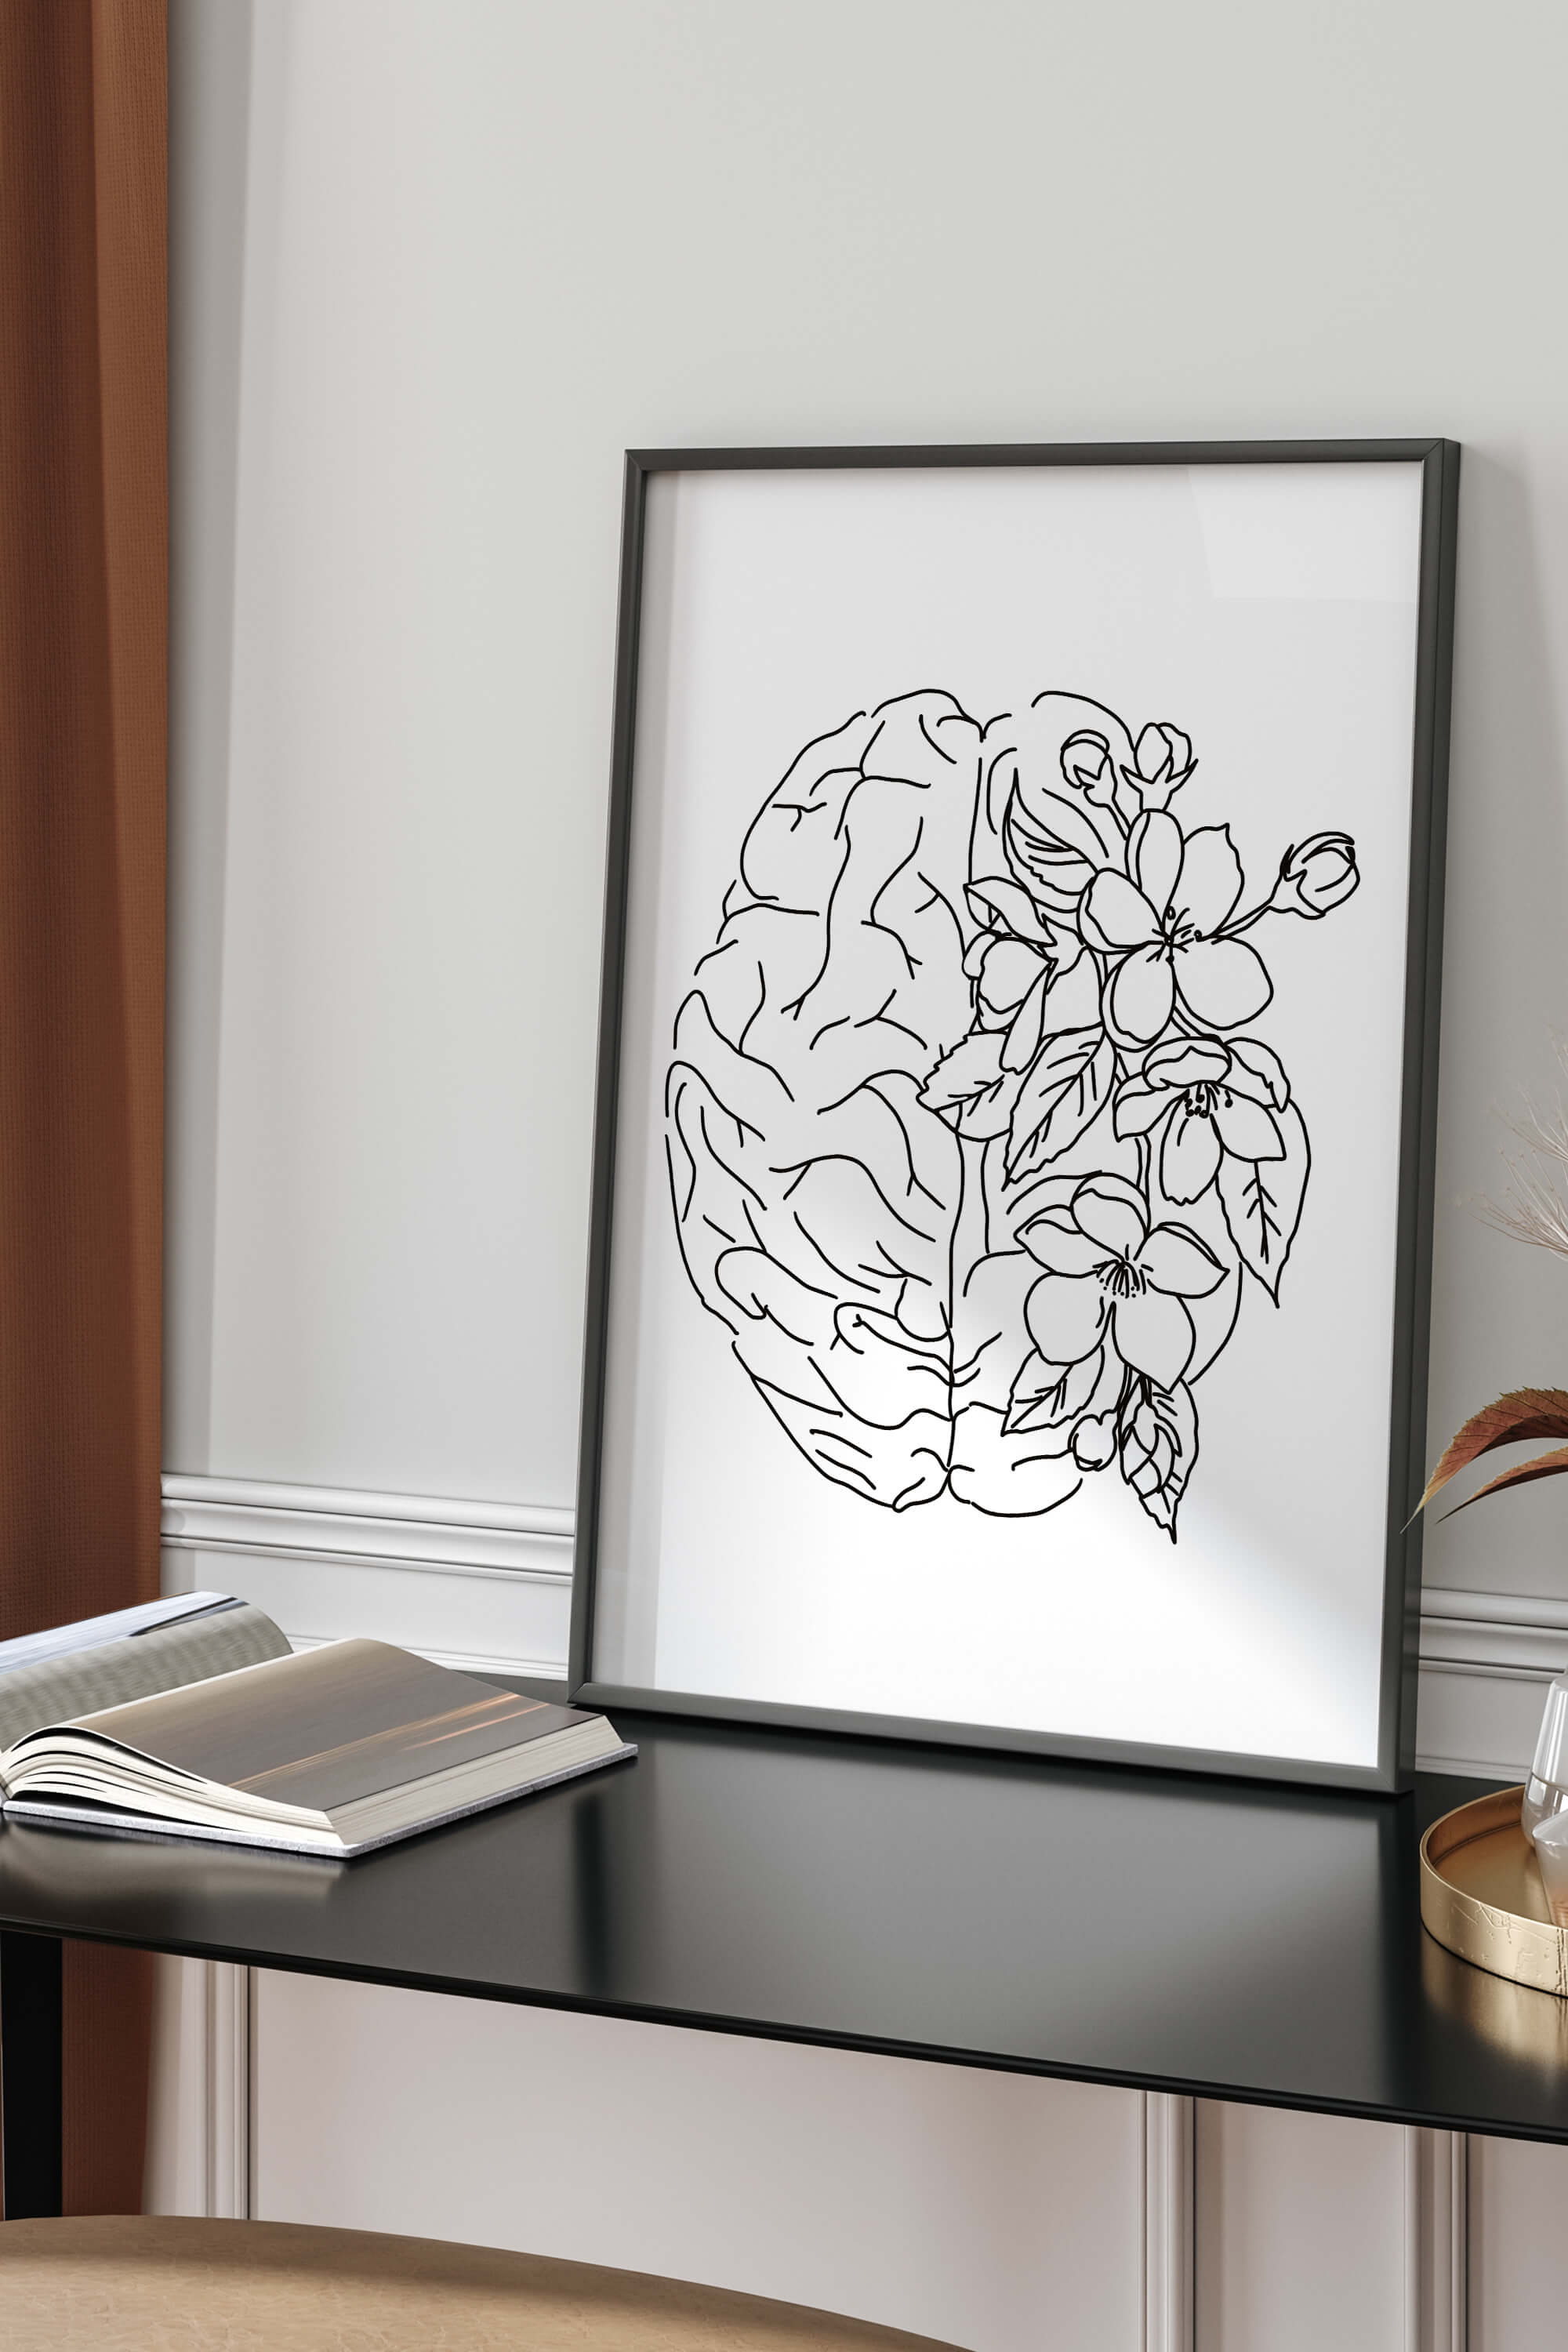 Sensory Oasis: Immerse yourself in a sensory journey with this floral brain wall art. The minimalistic yet detailed design evokes emotions and adds a serene ambiance, making it a perfect addition to therapeutic spaces.